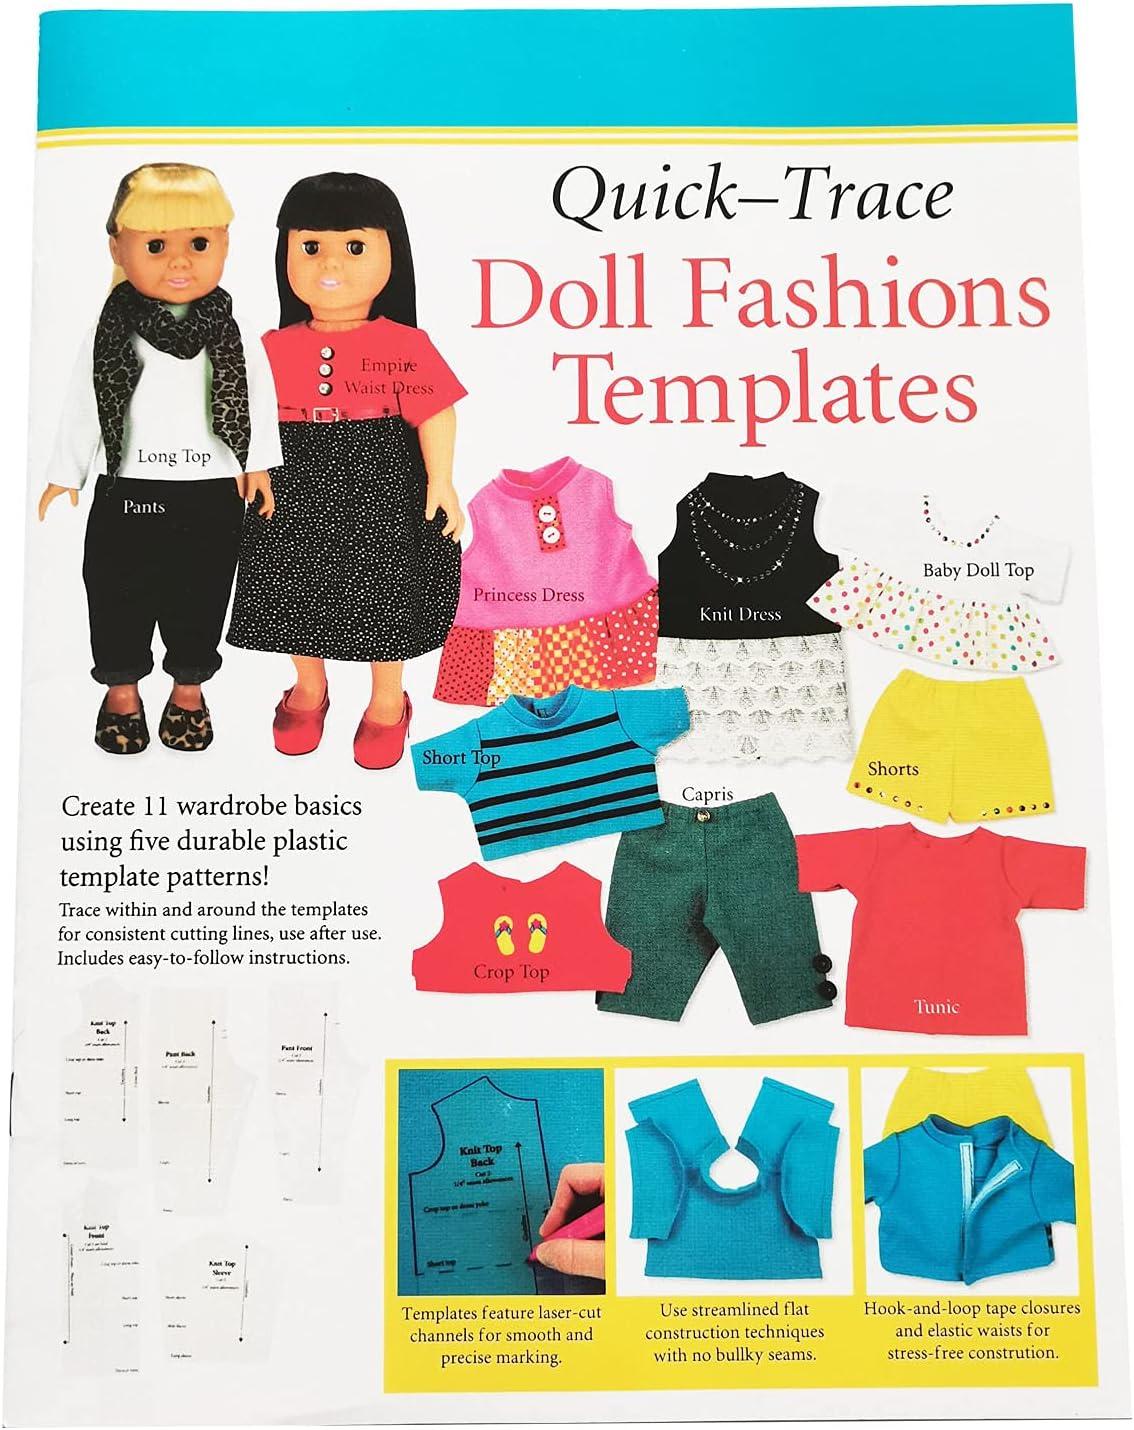 YICBOR Quilting Rulers and Templates, Quick-Trace Doll Fashions